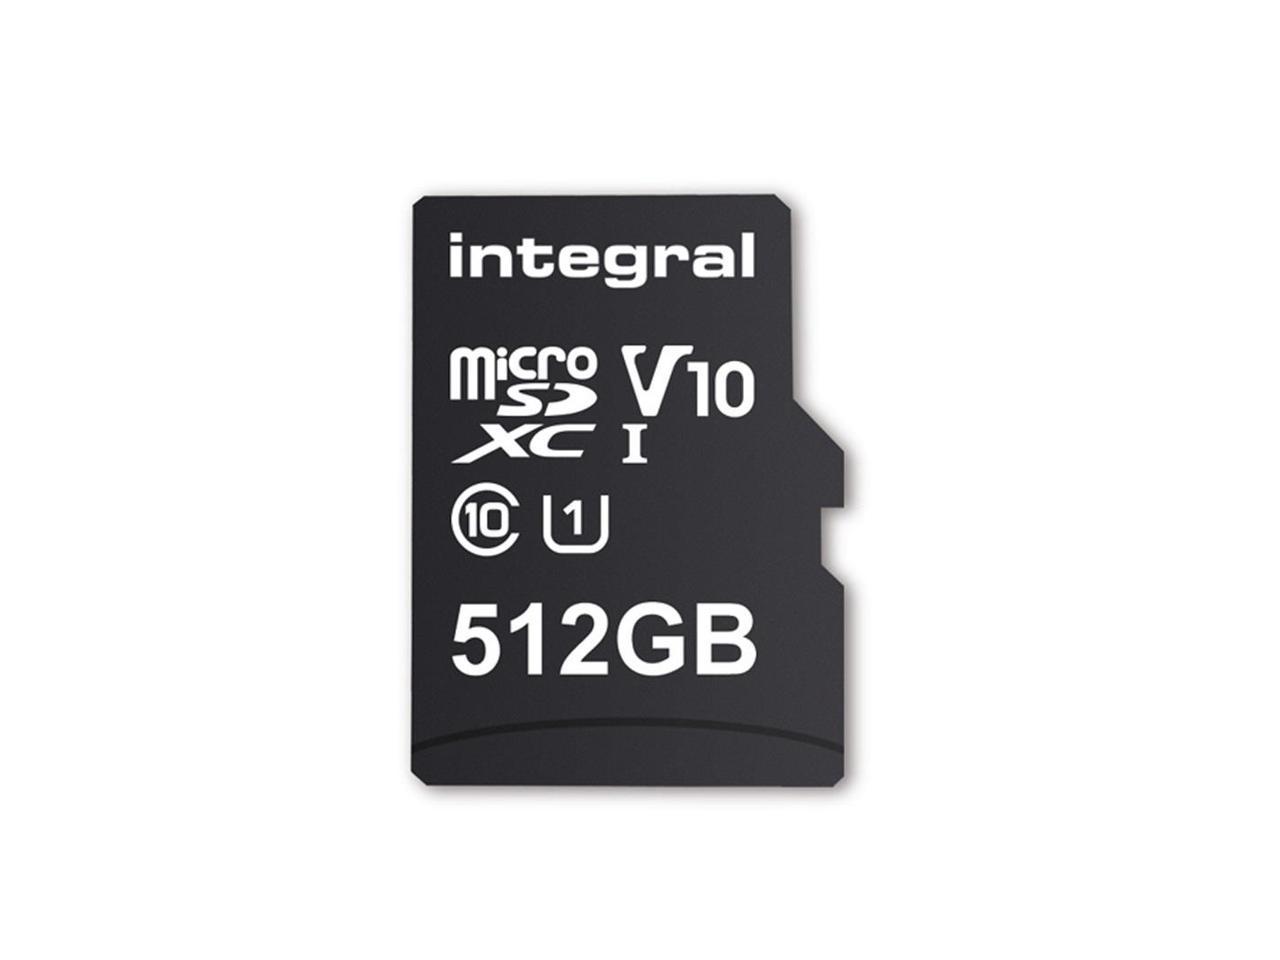 512GB Integral microSDXC CL10 UHS-I U1 Smartphone and Tablet Memory Card